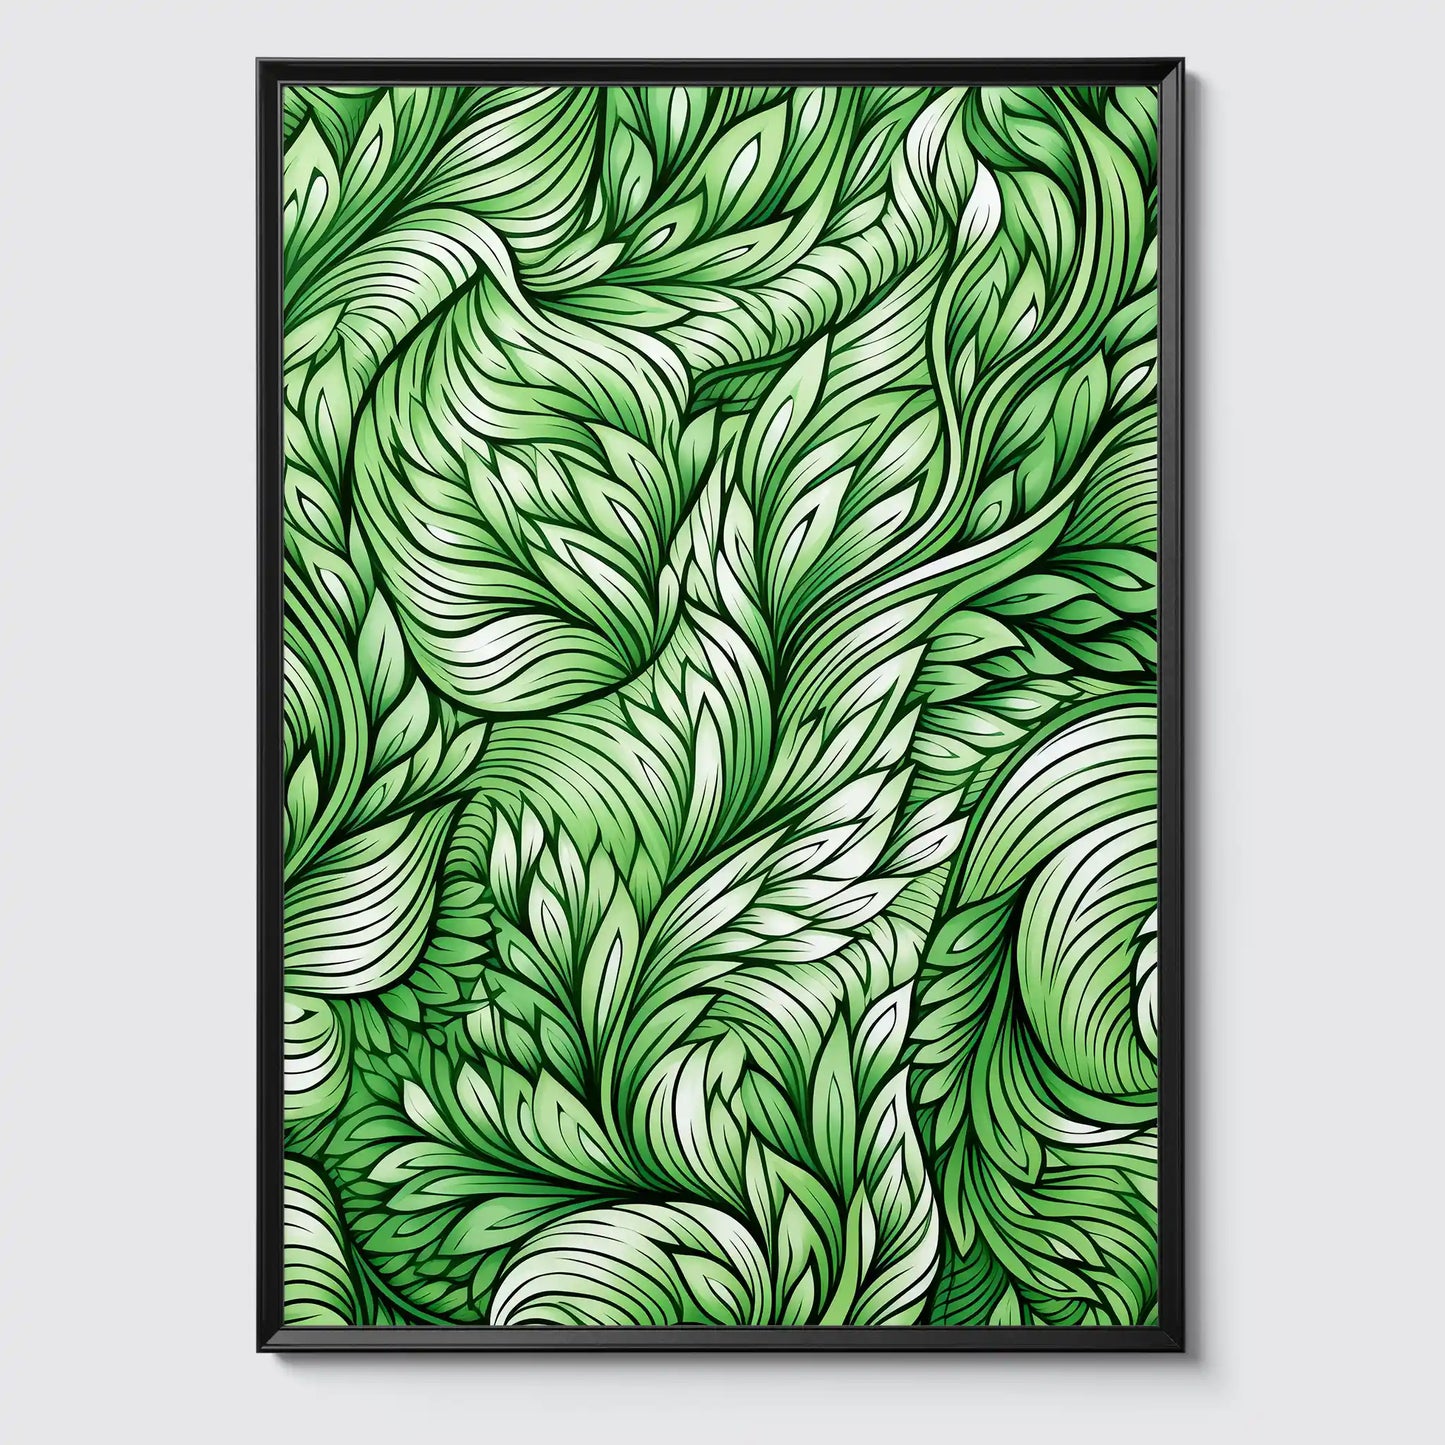 Doodle Pattern No 3 - Green - Sketch - Poster